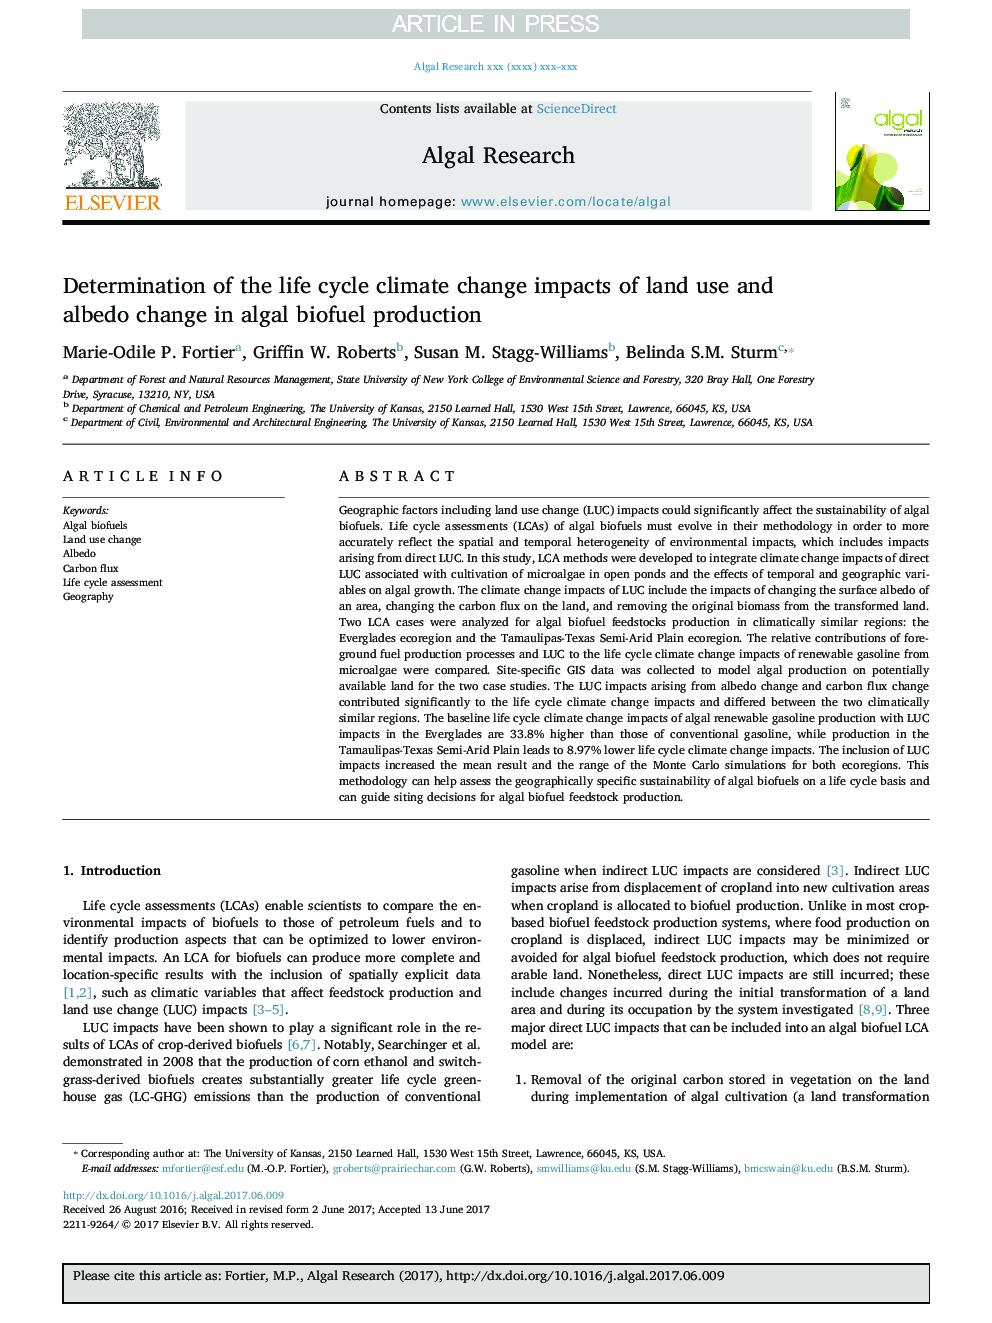 Determination of the life cycle climate change impacts of land use and albedo change in algal biofuel production